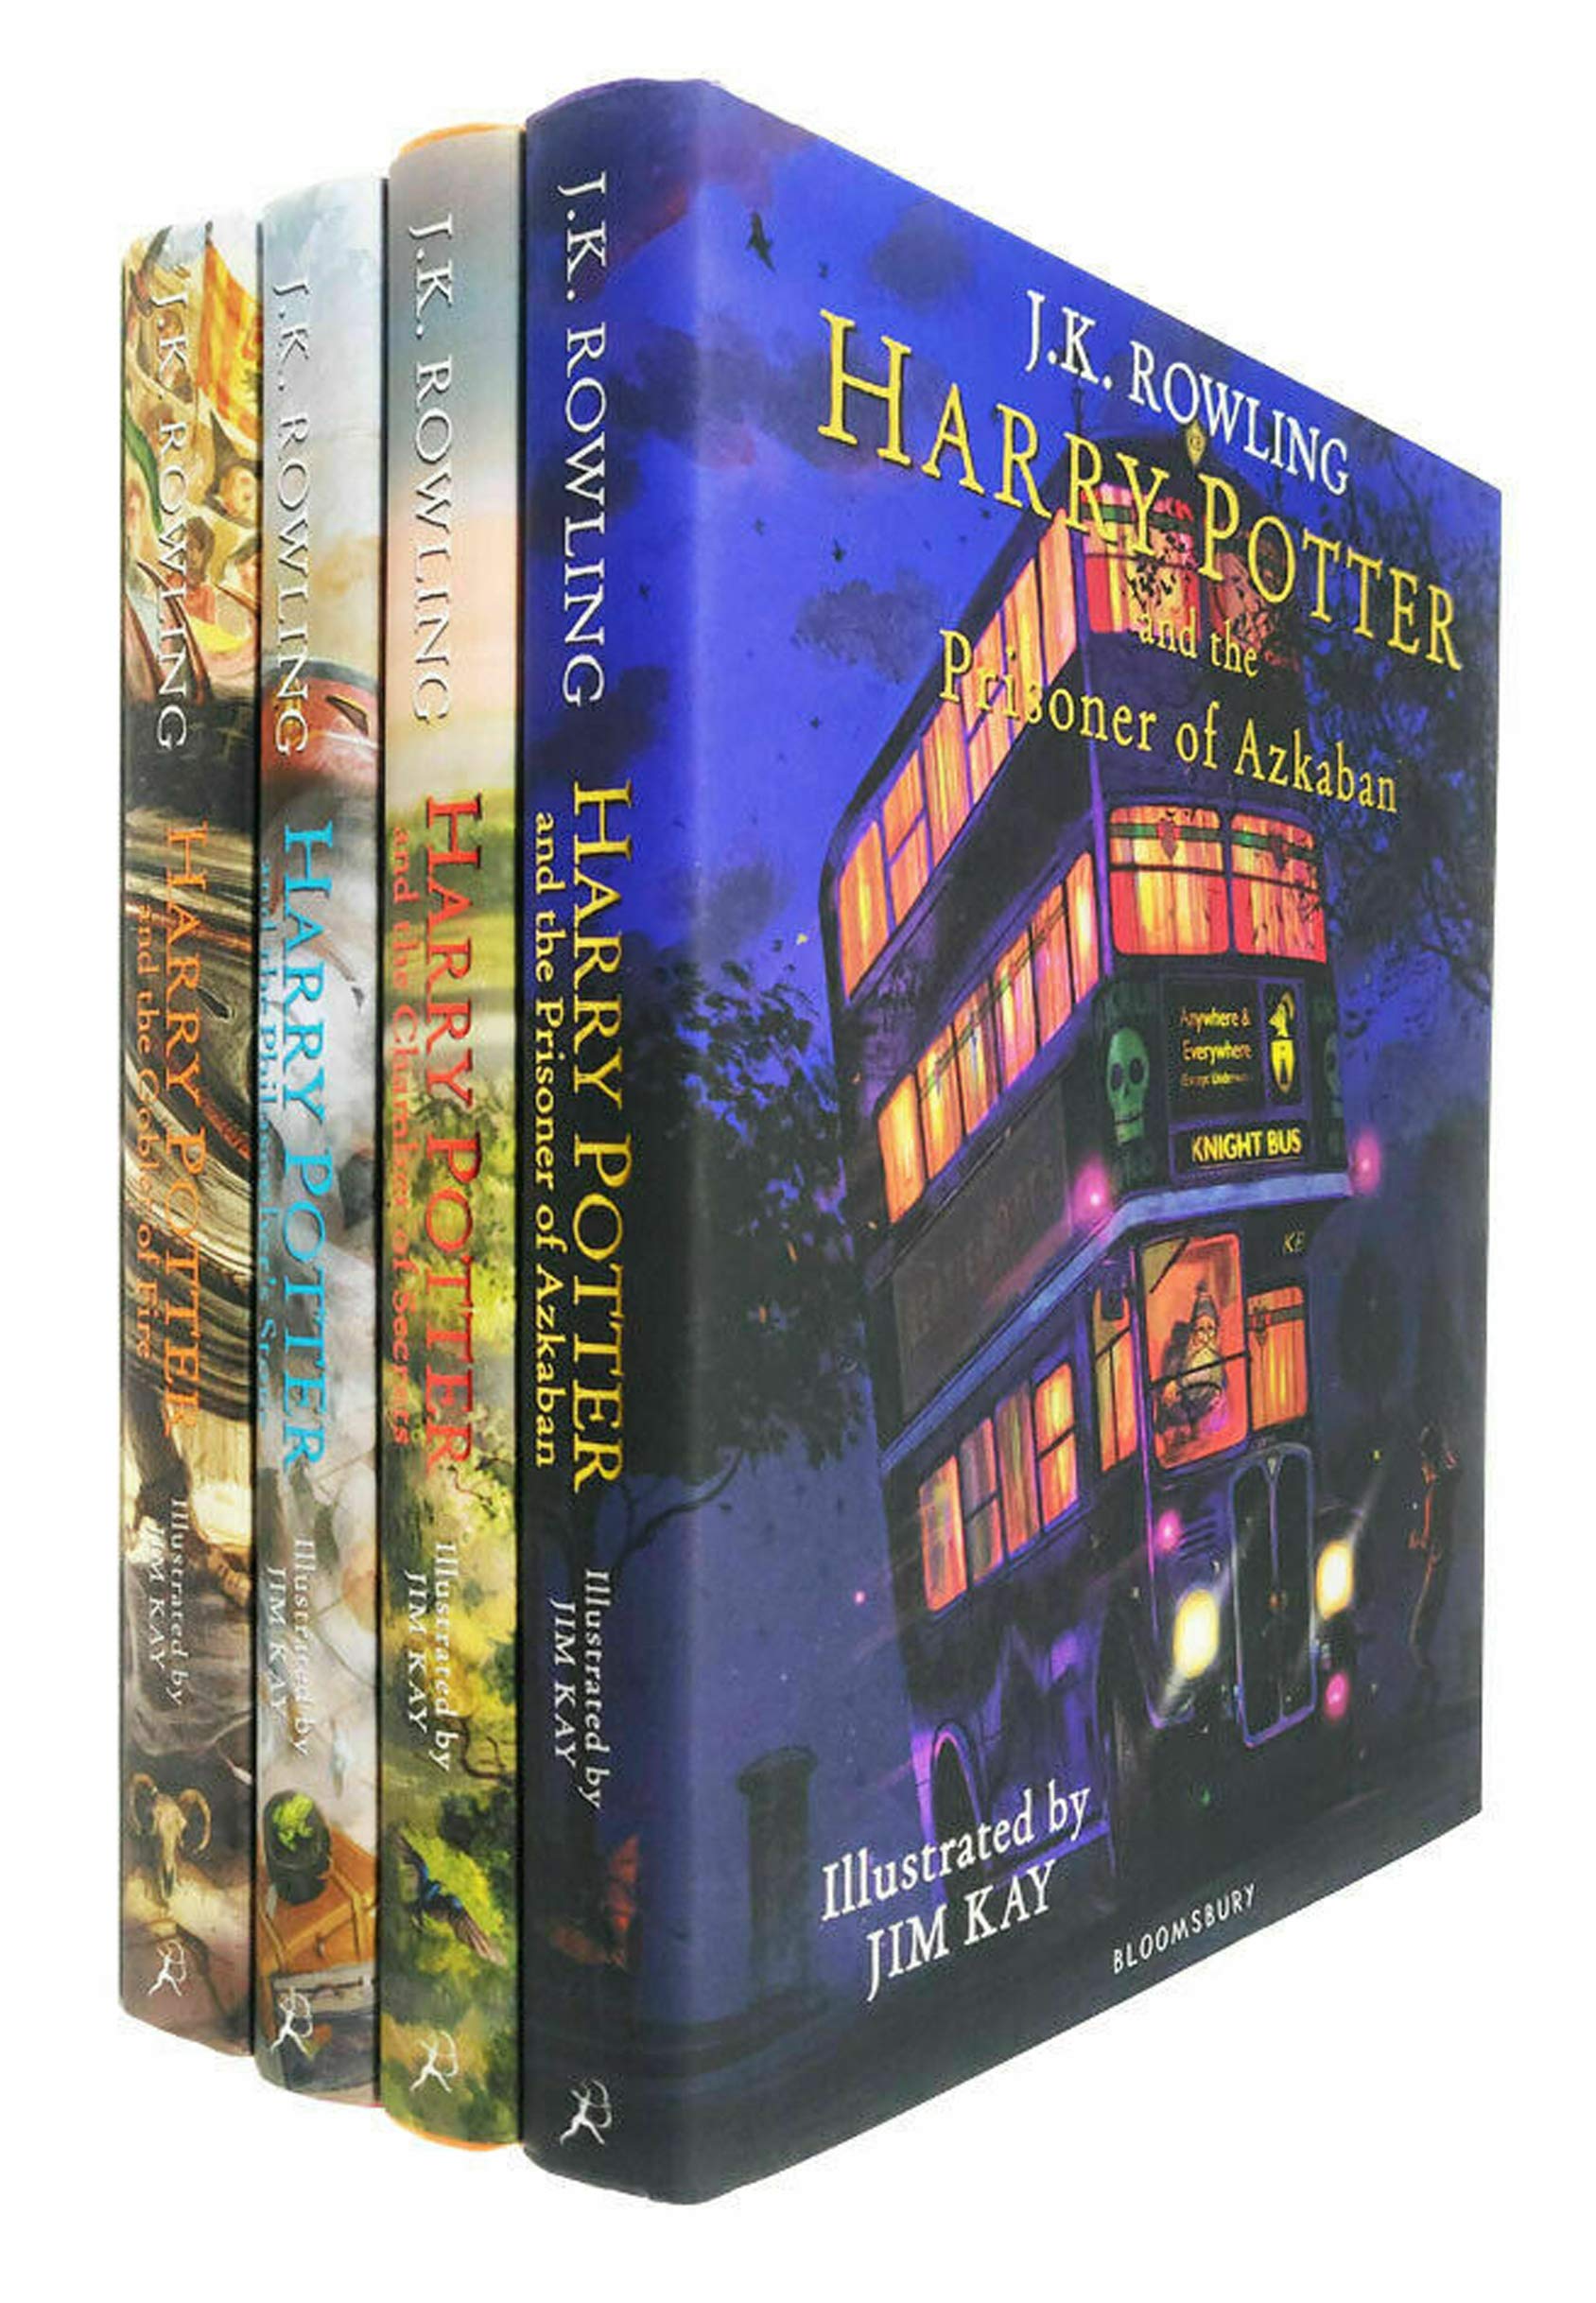 Harry Potter The Illustrated 4 Books Collection Set By J K Rowling - The Philosophers Stone, The Chamber of Secrets, The Prisoner of Azkaban, The G...